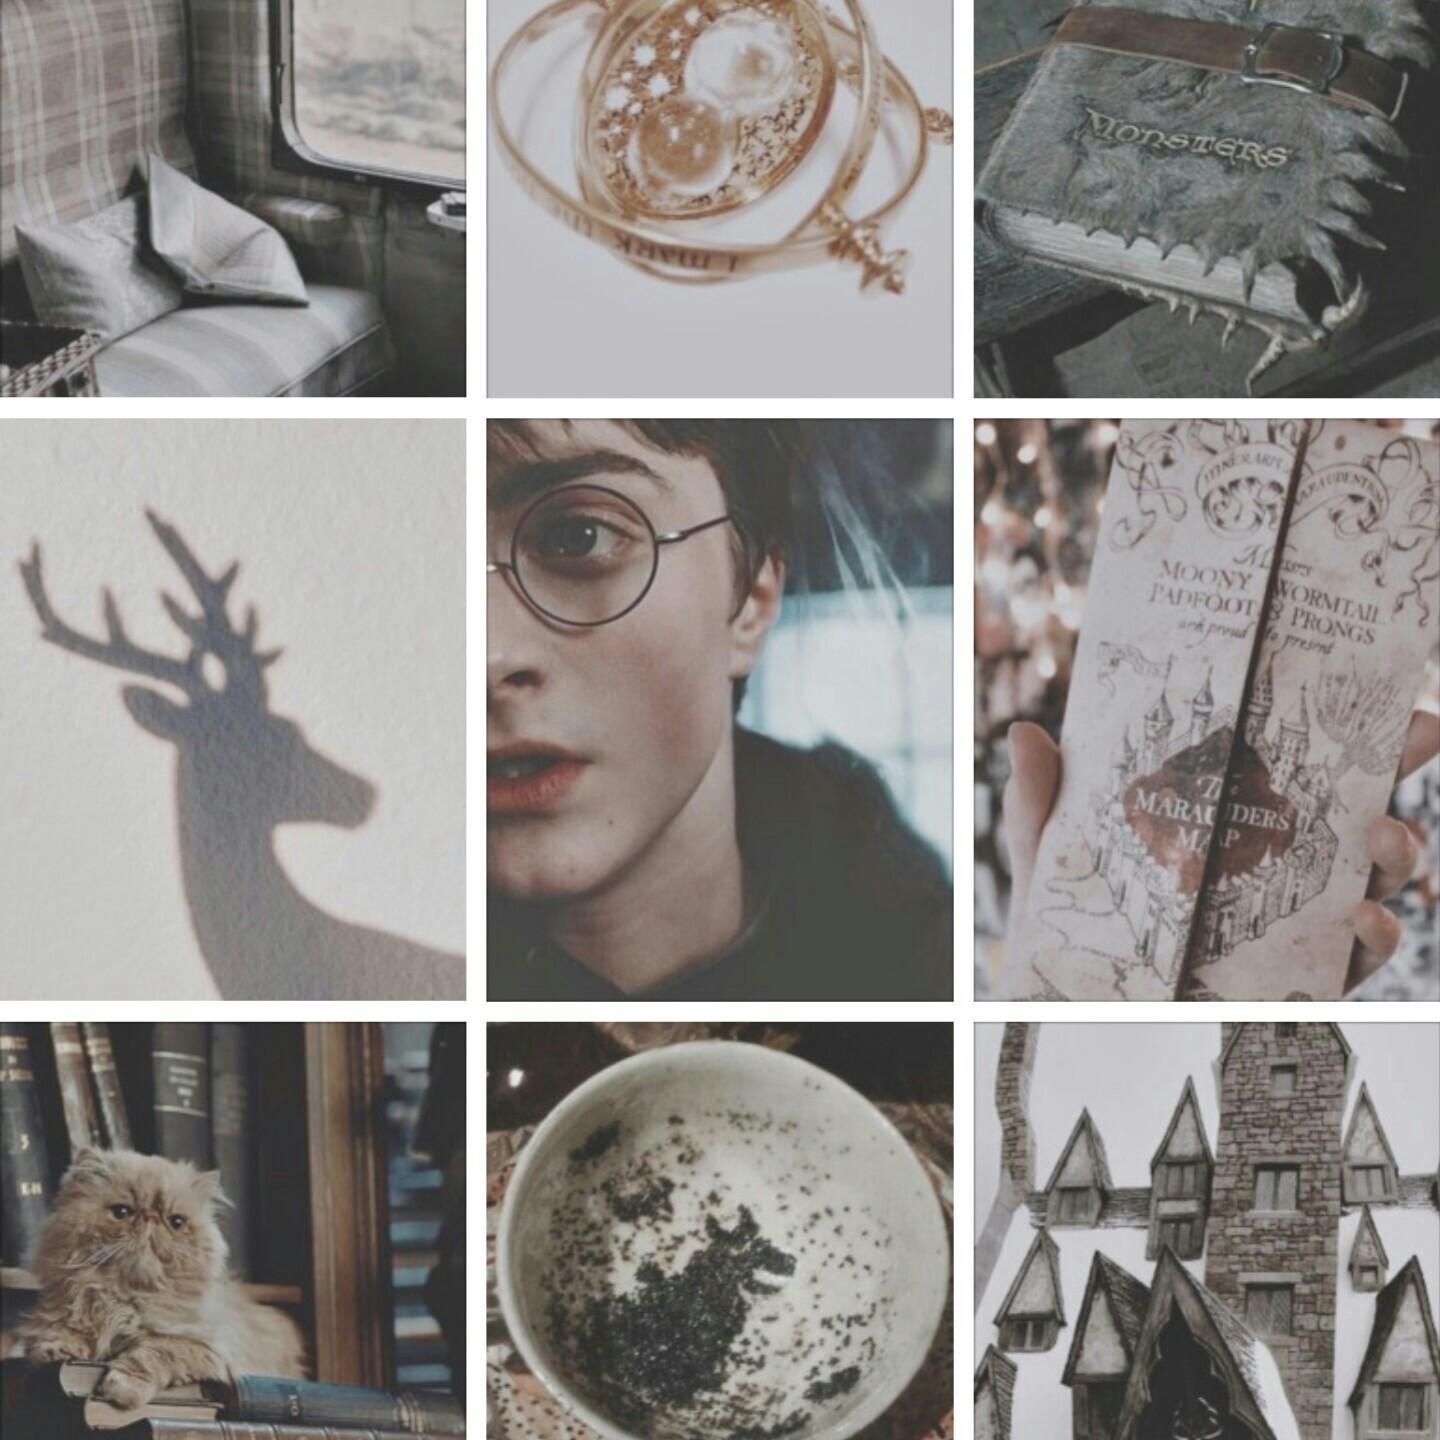       ⚡click here plz⚡
guess which hp book this is
love y'all
📘Roons📘